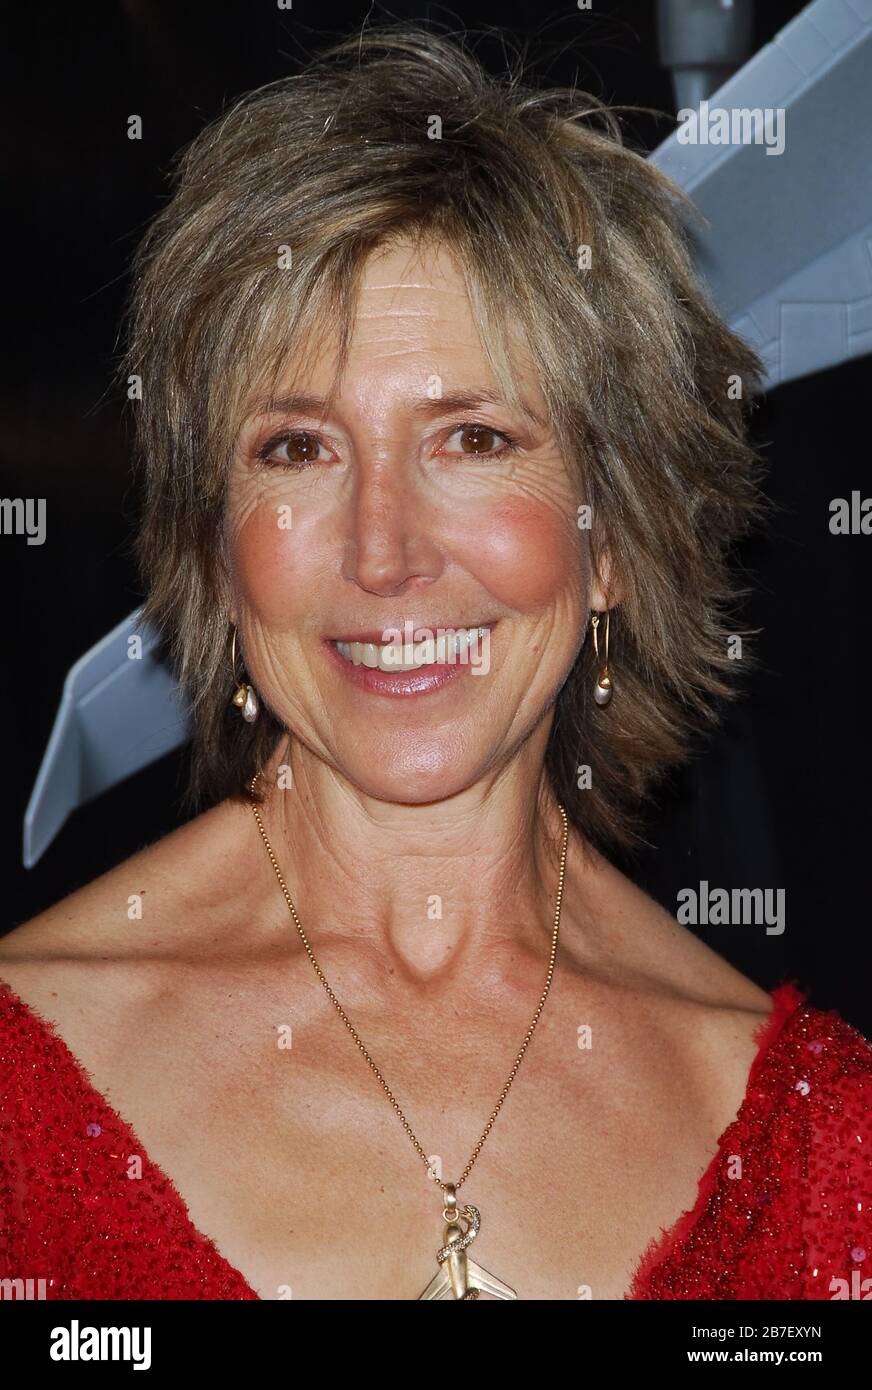 Lin Shaye at the Los Angeles Premiere of 'Snakes On A Plane' held at the Grauman's Chinese Theater in Hollywood, CA. The event took place on Thursday, August 17, 2006.  Photo by: SBM / PictureLux Stock Photo